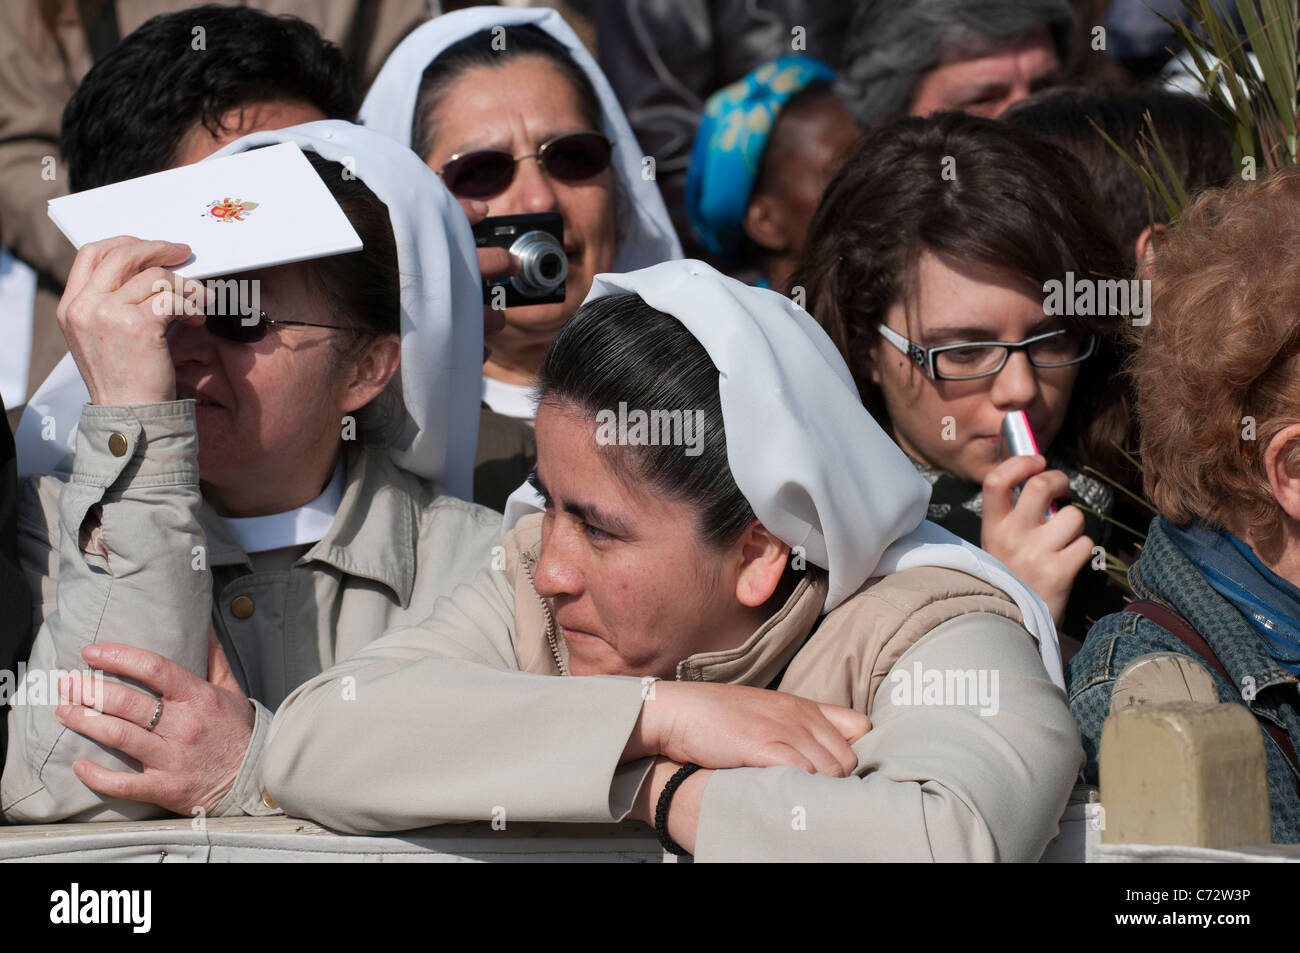 South American nuns waiting in the crowd for the Pope's procession, Saint Peter's Square, Palm Sunday 2011 Vatican City Stock Photo